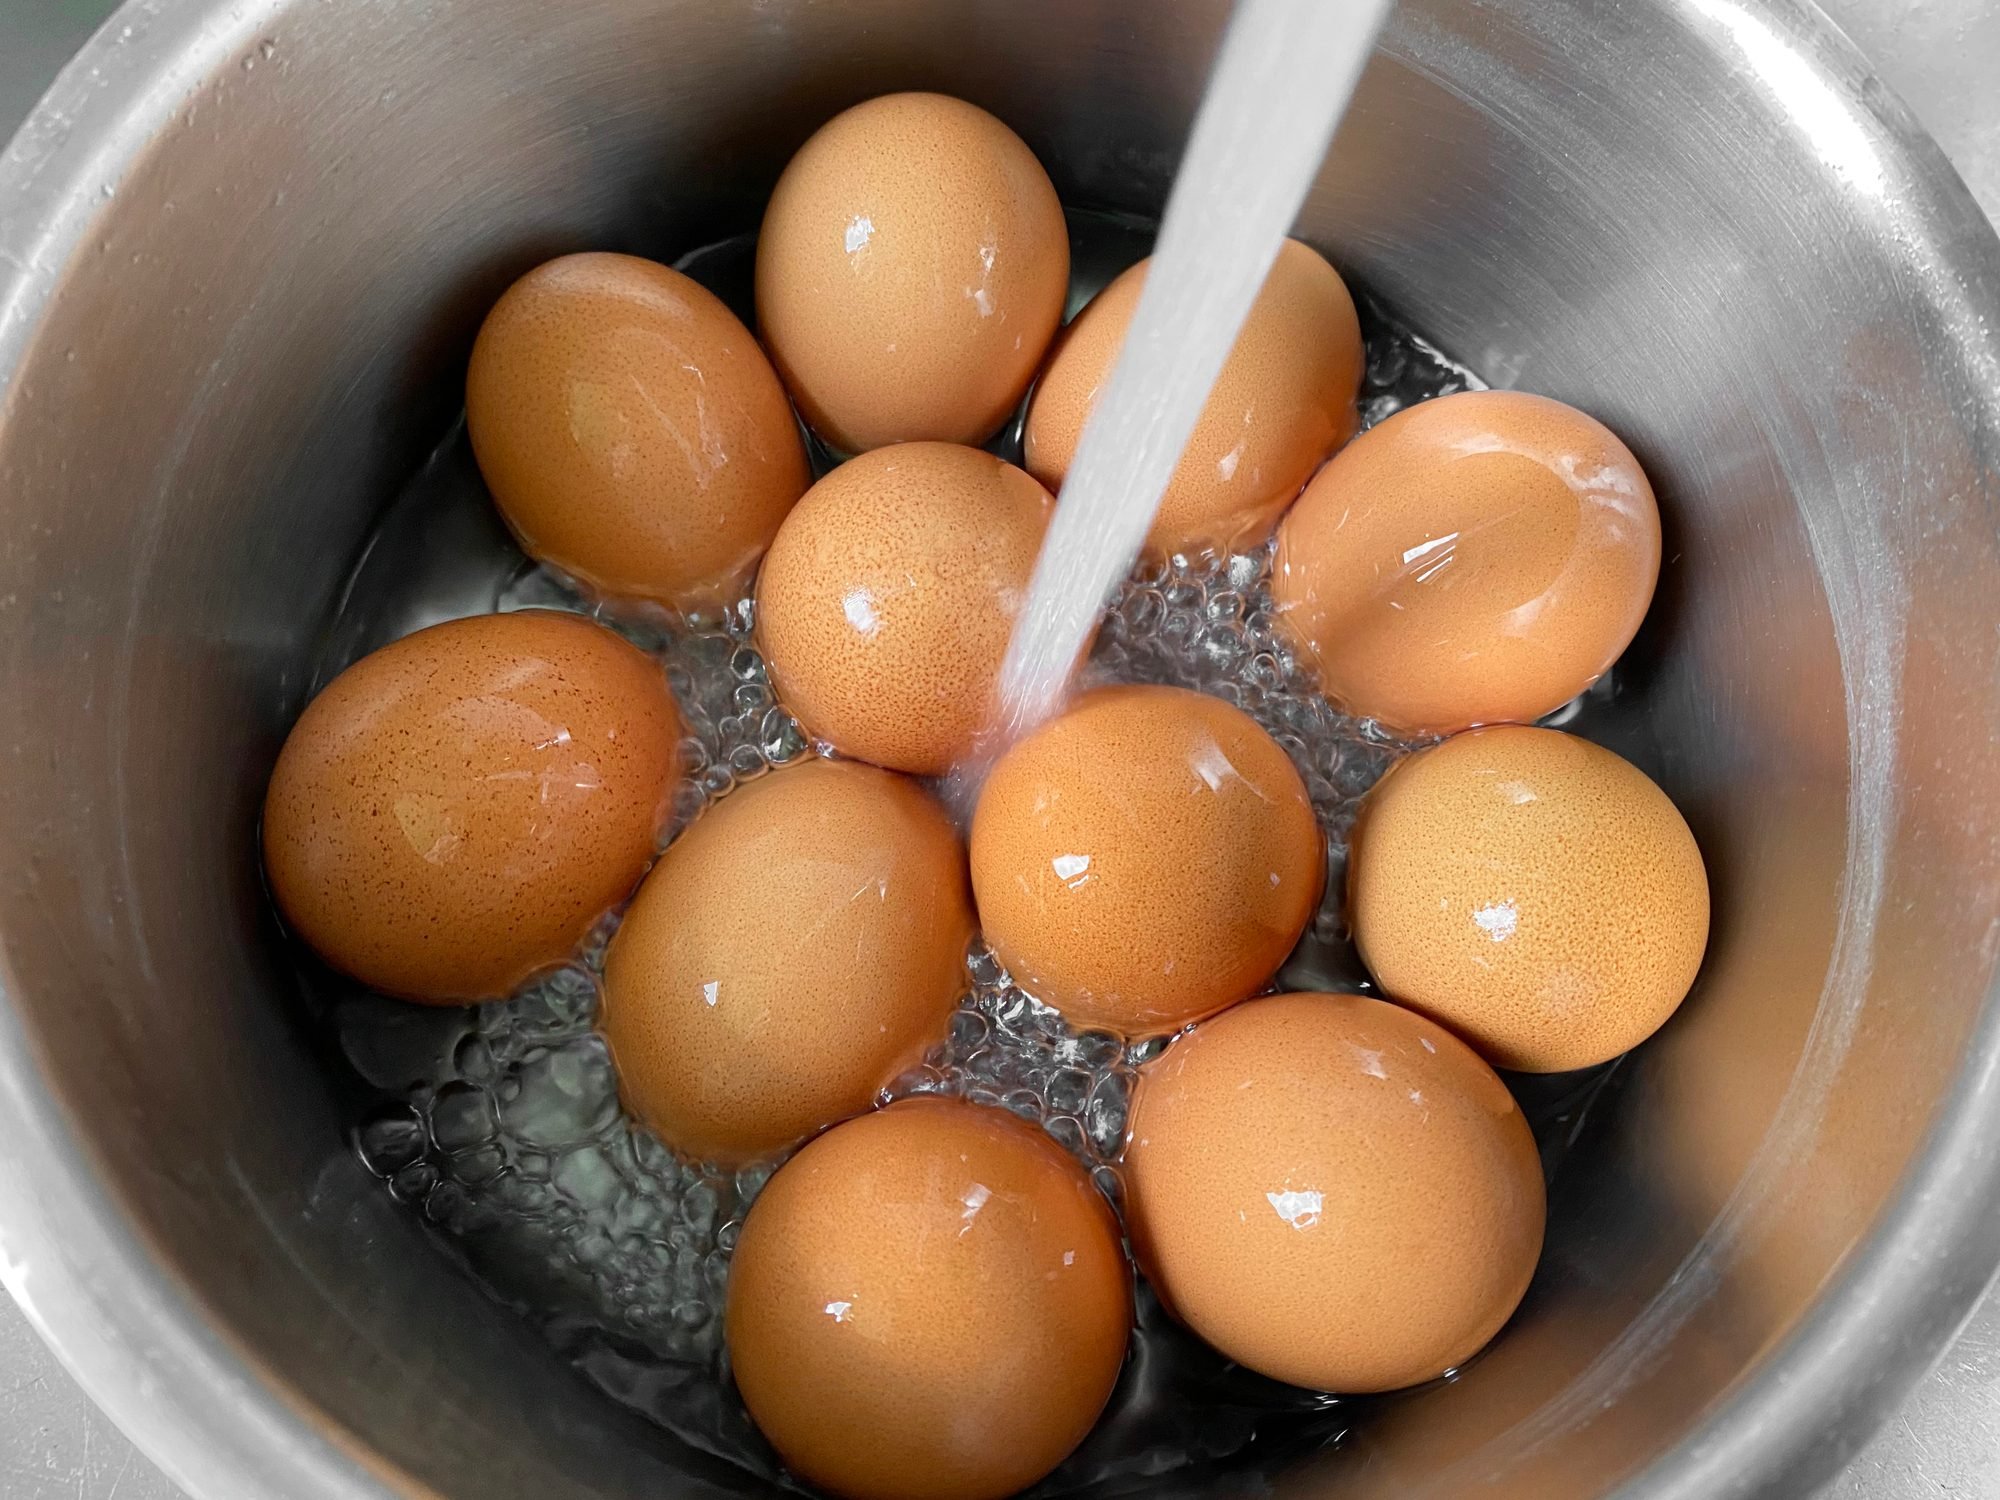 Eggs under running water in a bowl in the kitchen sink